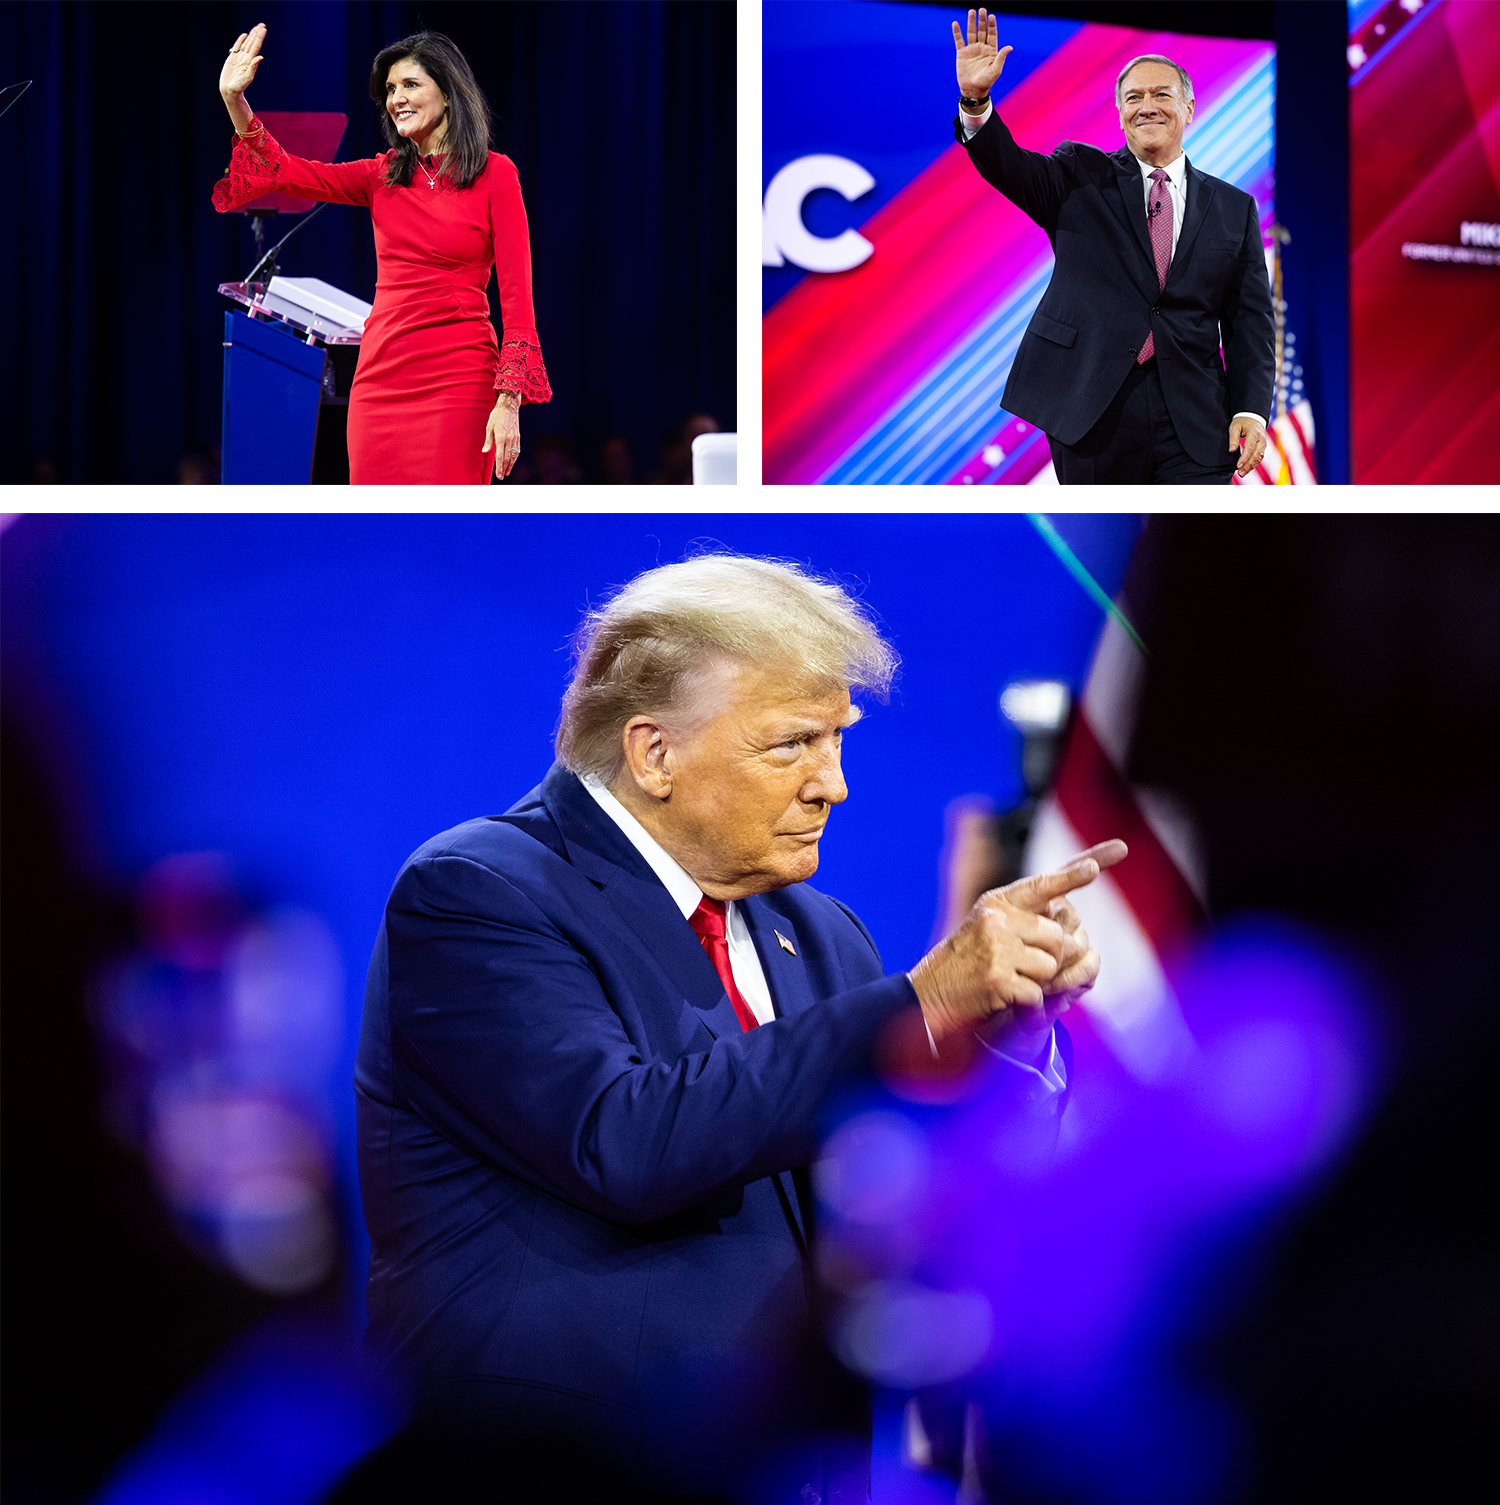 Former U.N. Ambassador Nikki Haley (left) has already jumped into the 2024 race, while former Secretary of State Mike Pompeo (right) remains undecided. But Trump (bottom) is still the star of the GOP, if CPAC is any indication.